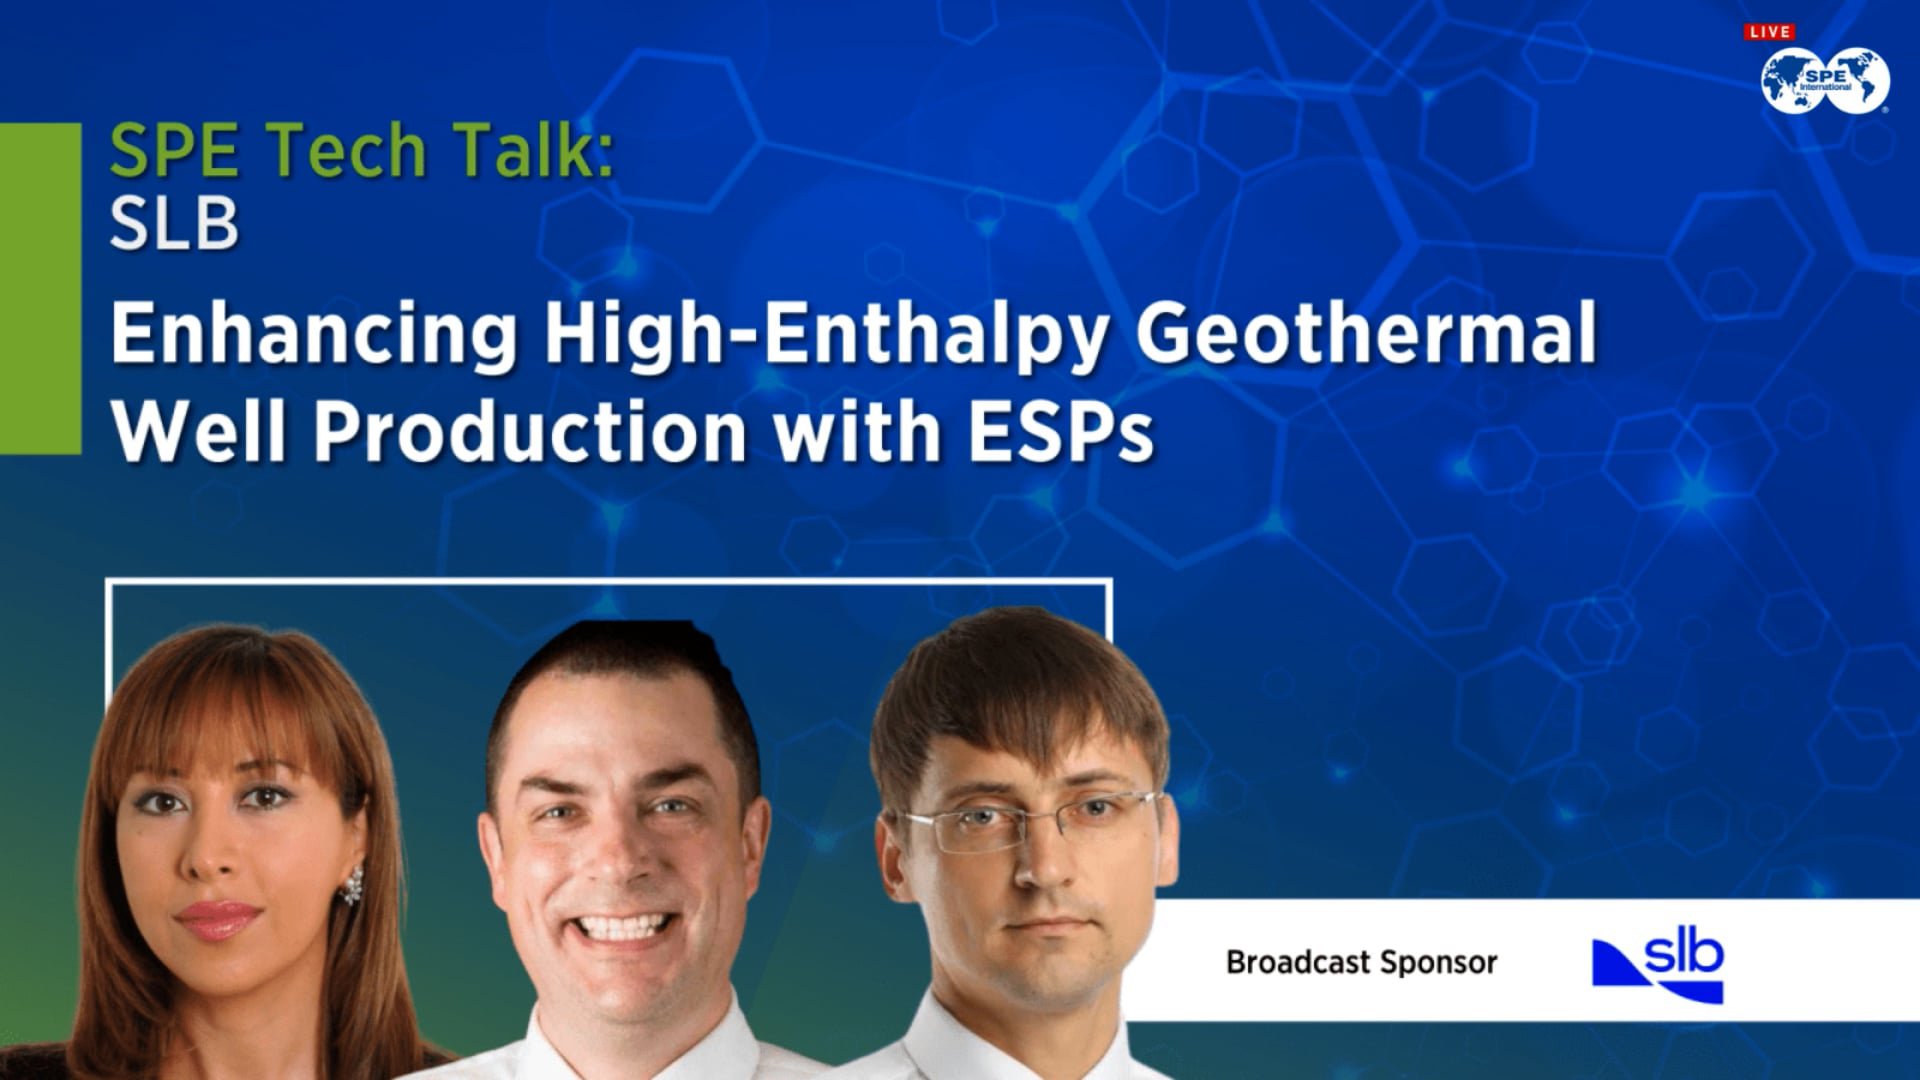 Enhancing High-Enthalpy Geothermal Well Production with ESPs